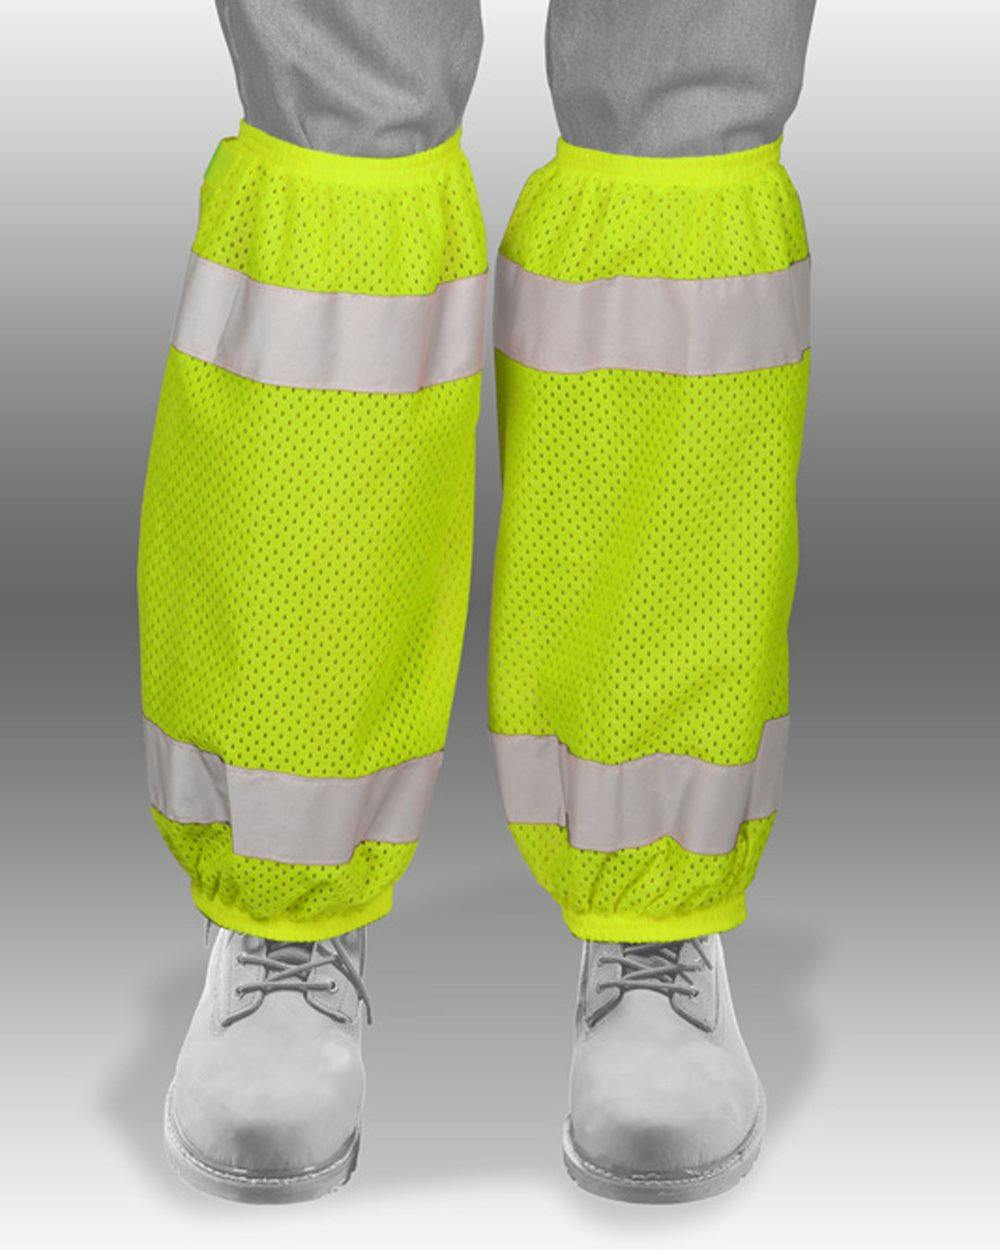 Image for Mesh Gaiters - 3930-3931